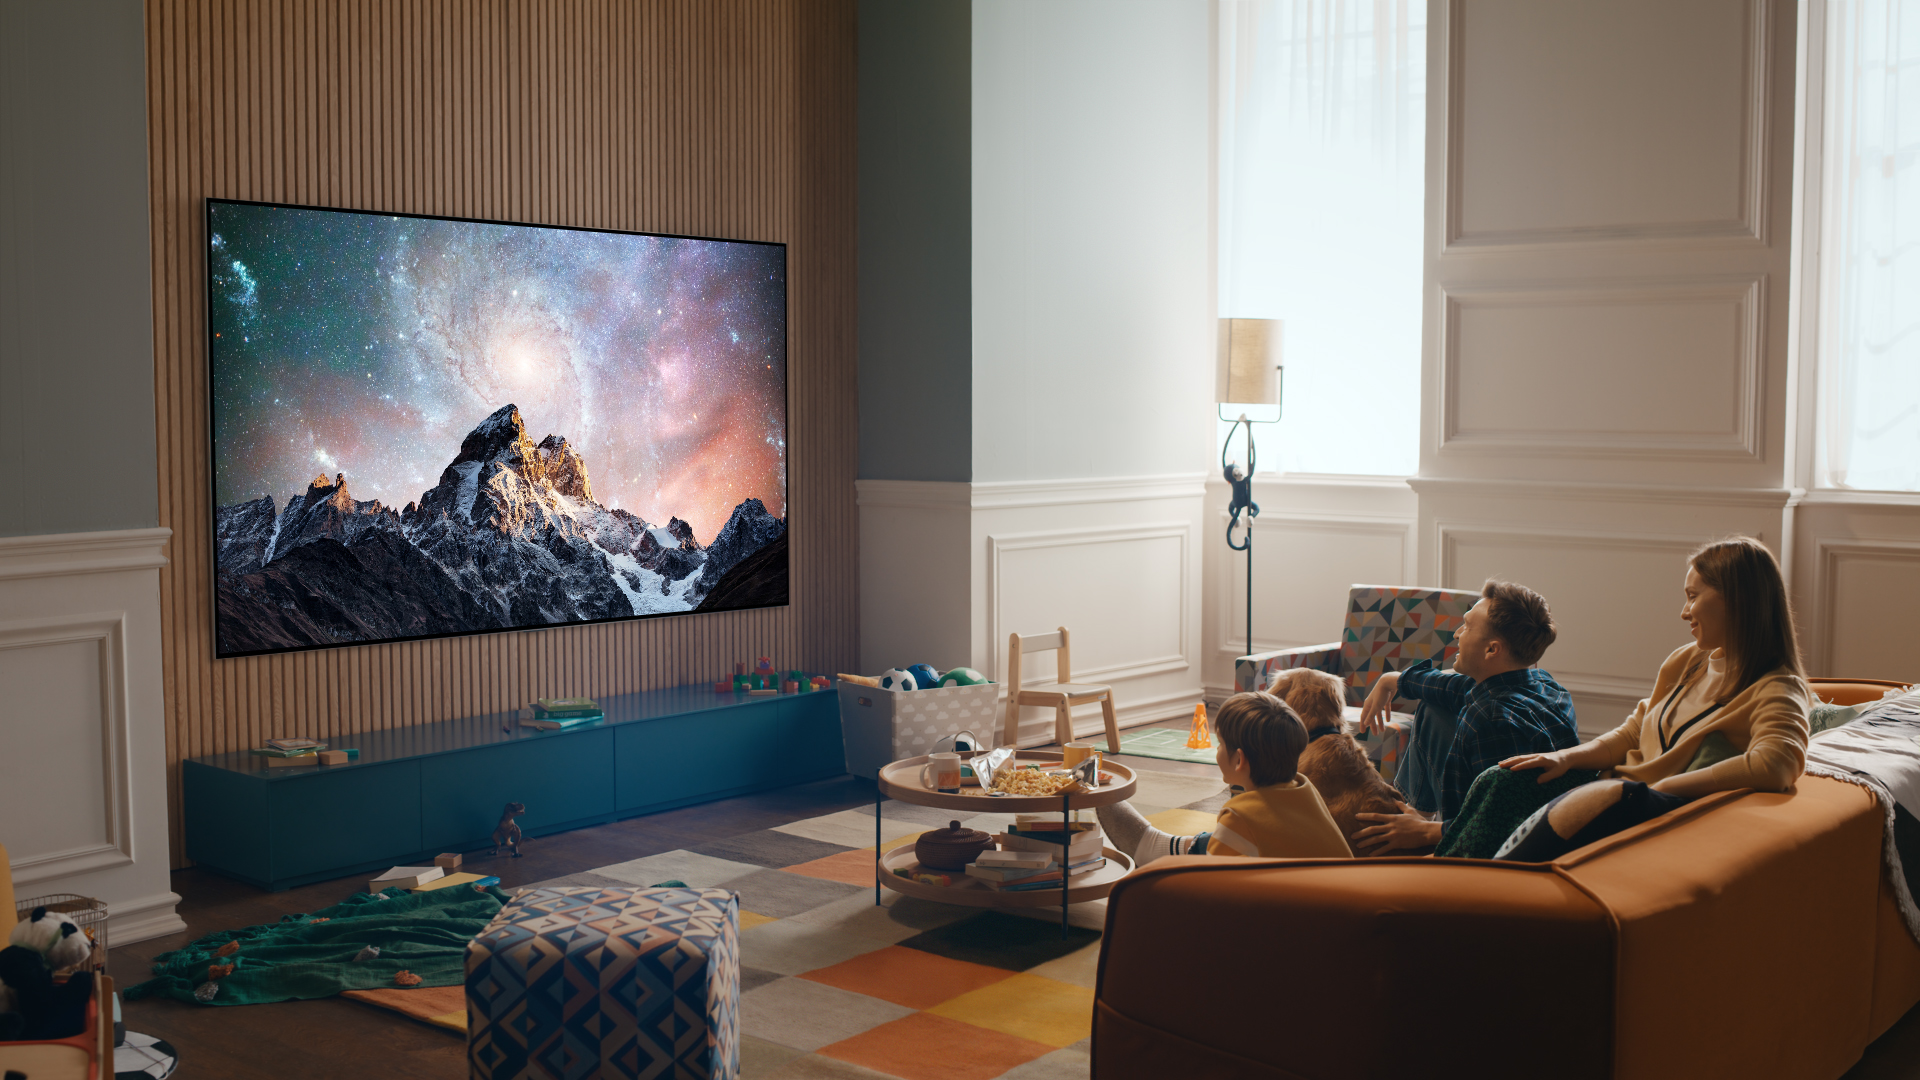  LG announces biggest and smallest OLED gaming TVs yet 